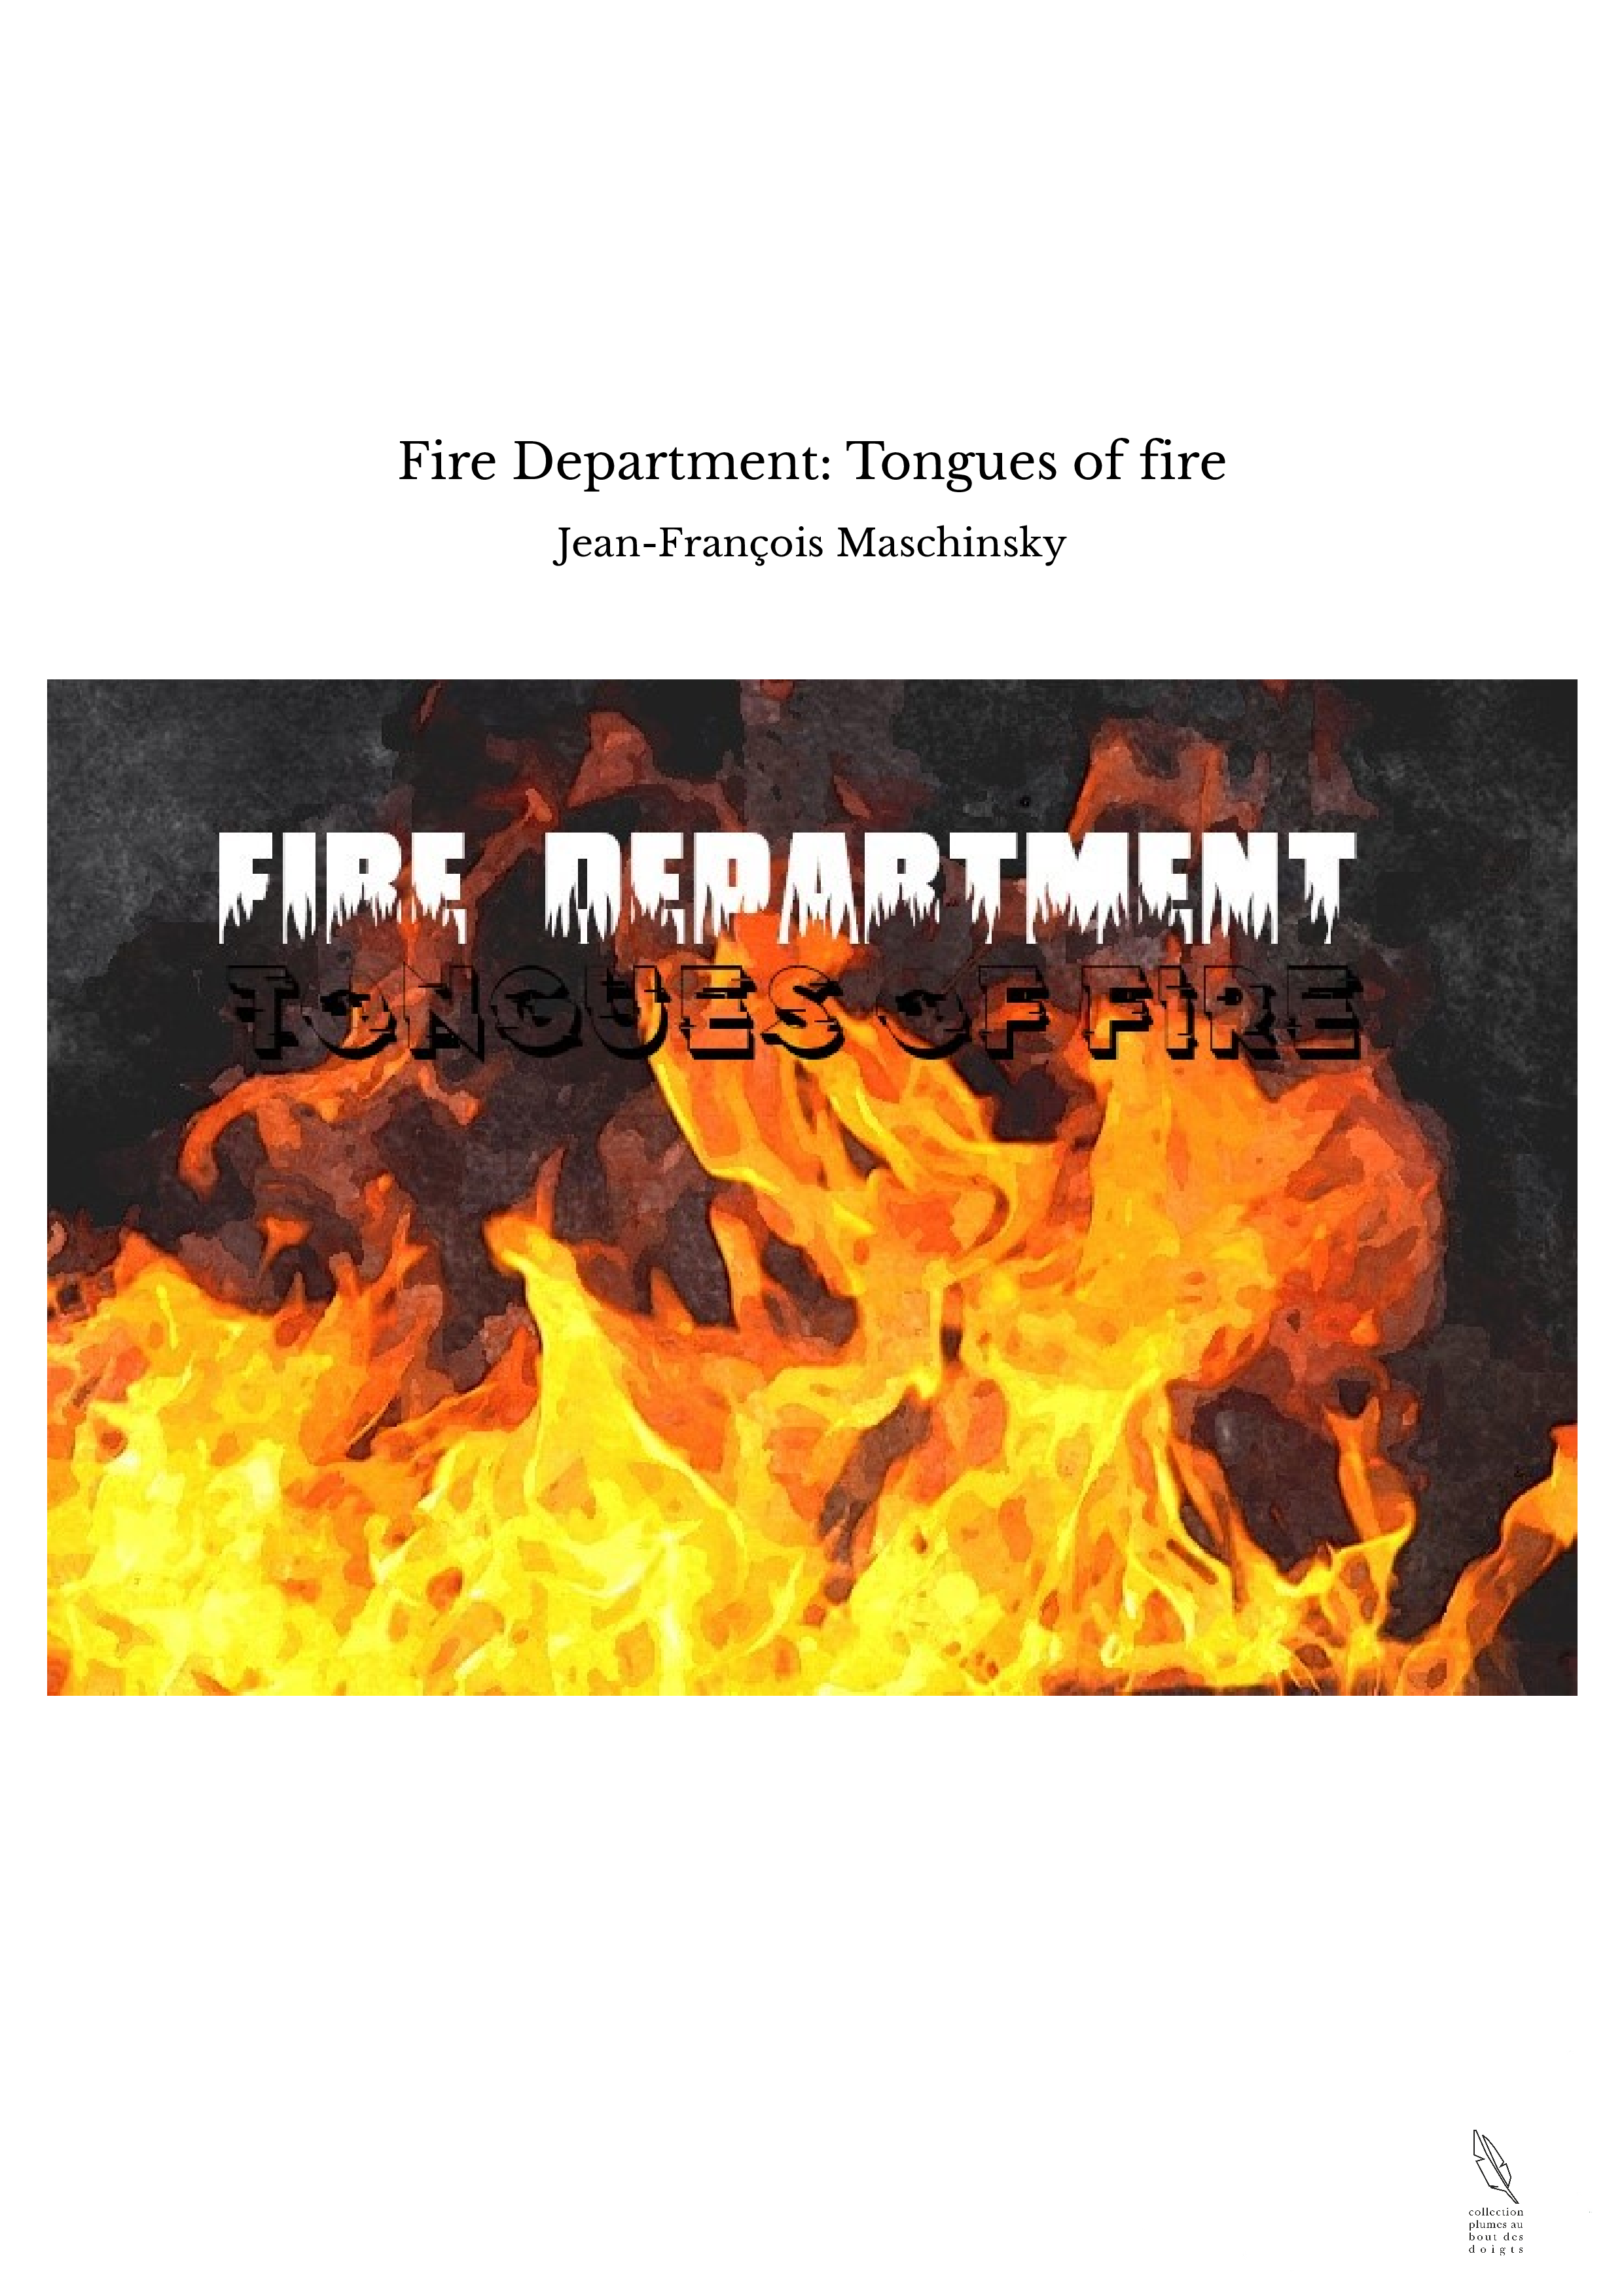 Fire Department: Tongues of fire